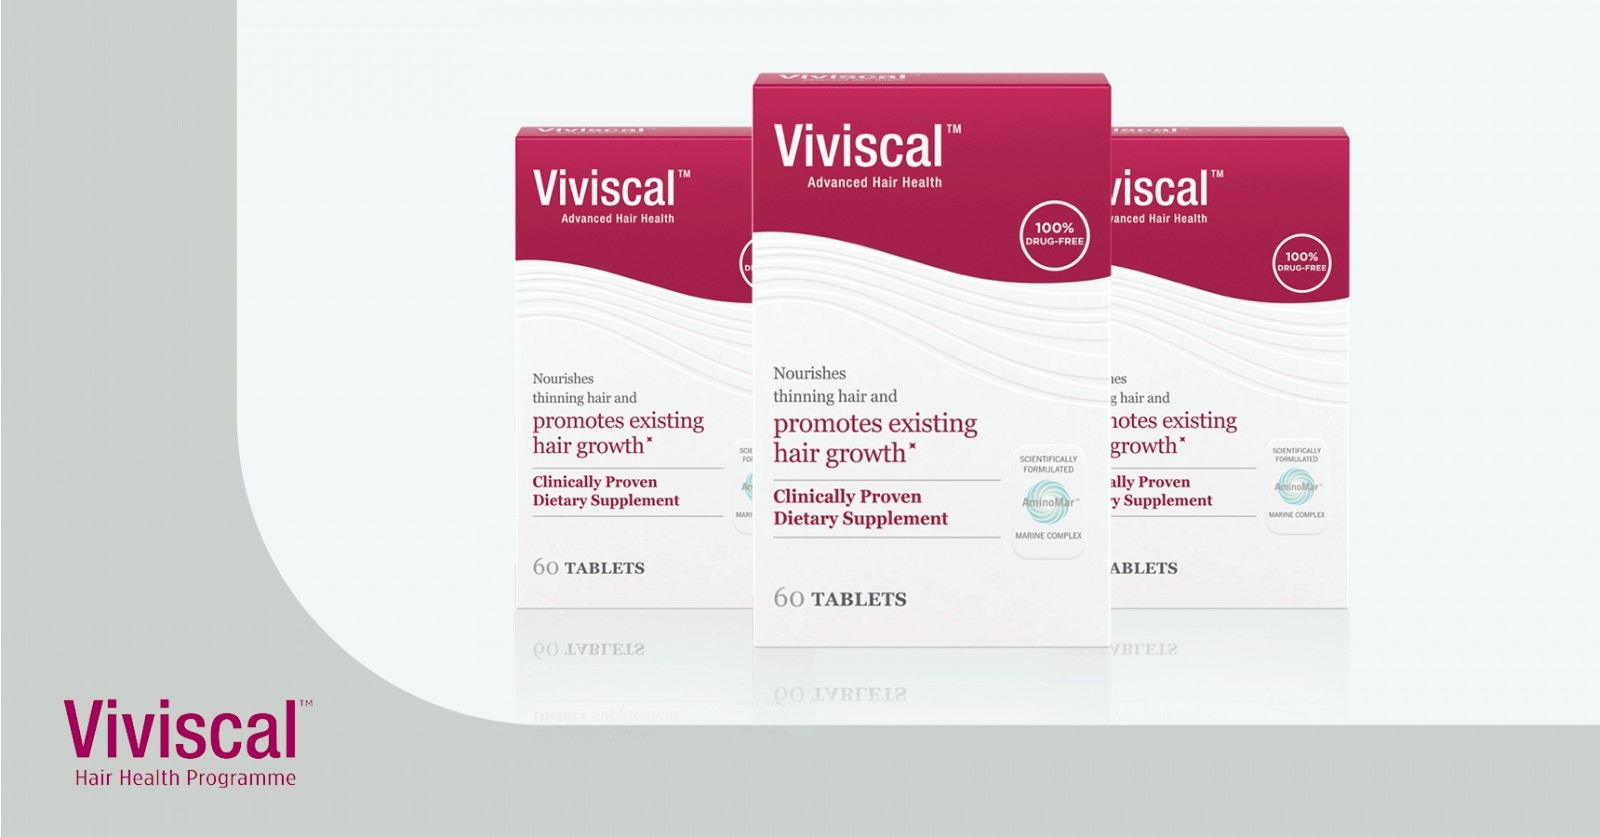 Viviscal is a daily hair supplement proven to promote existing hair growth. Suitable for both men and women.